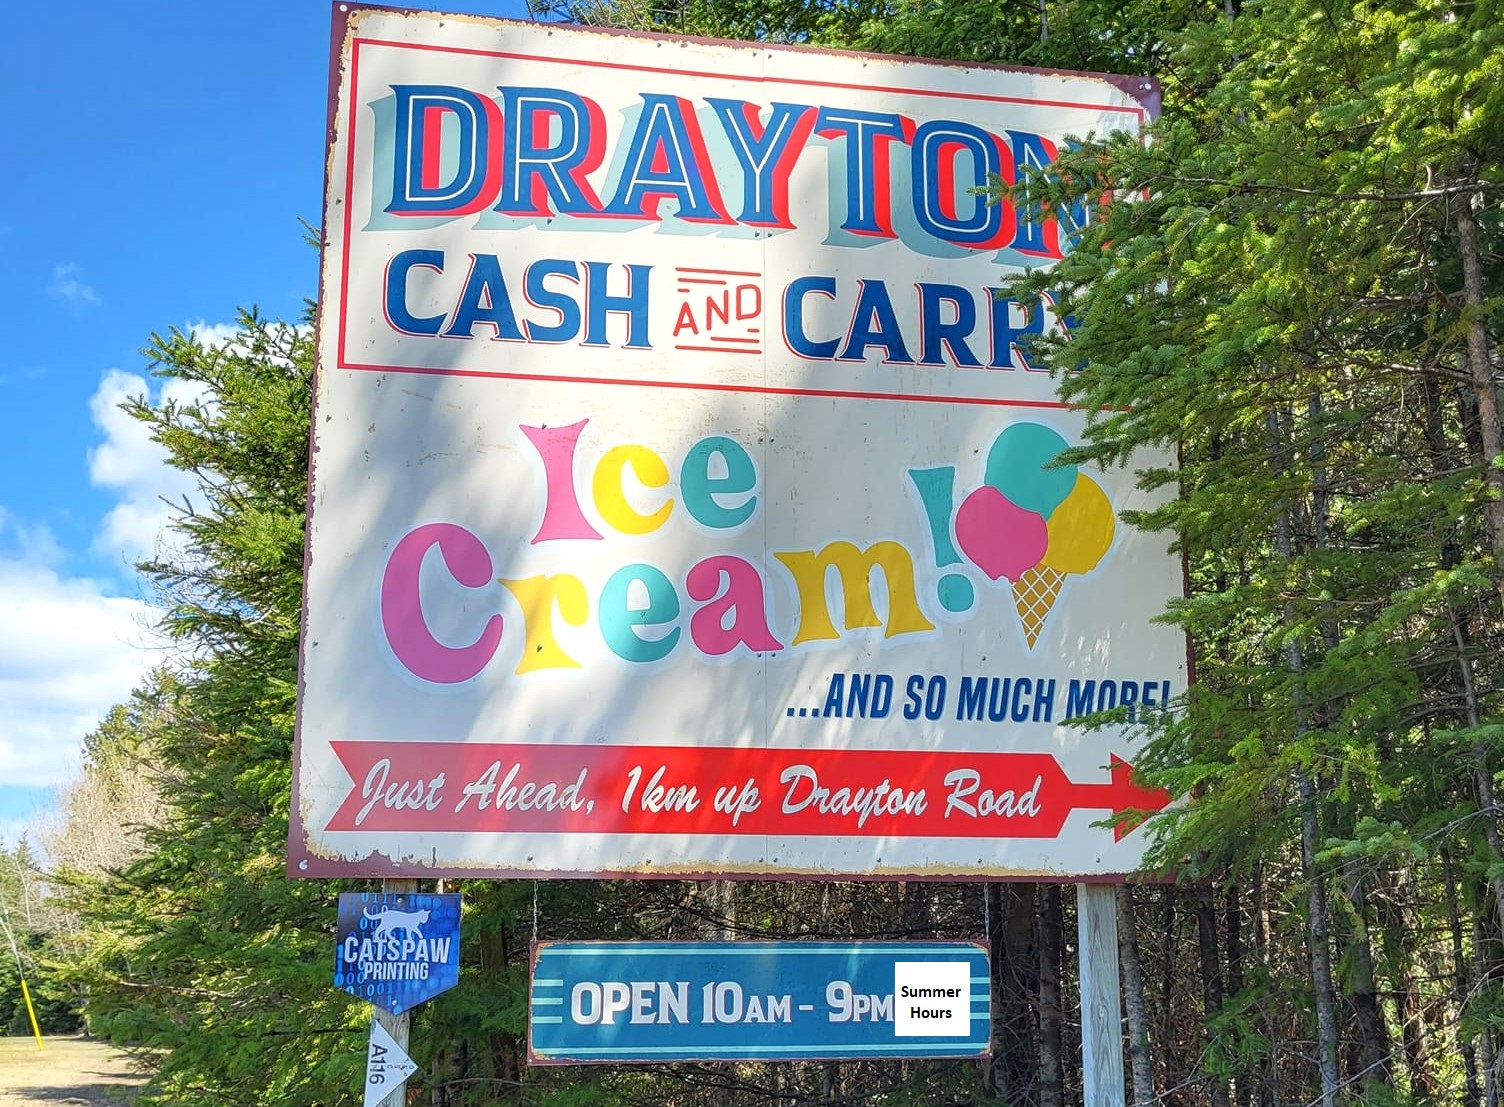 About Drayton Cash and Carry!